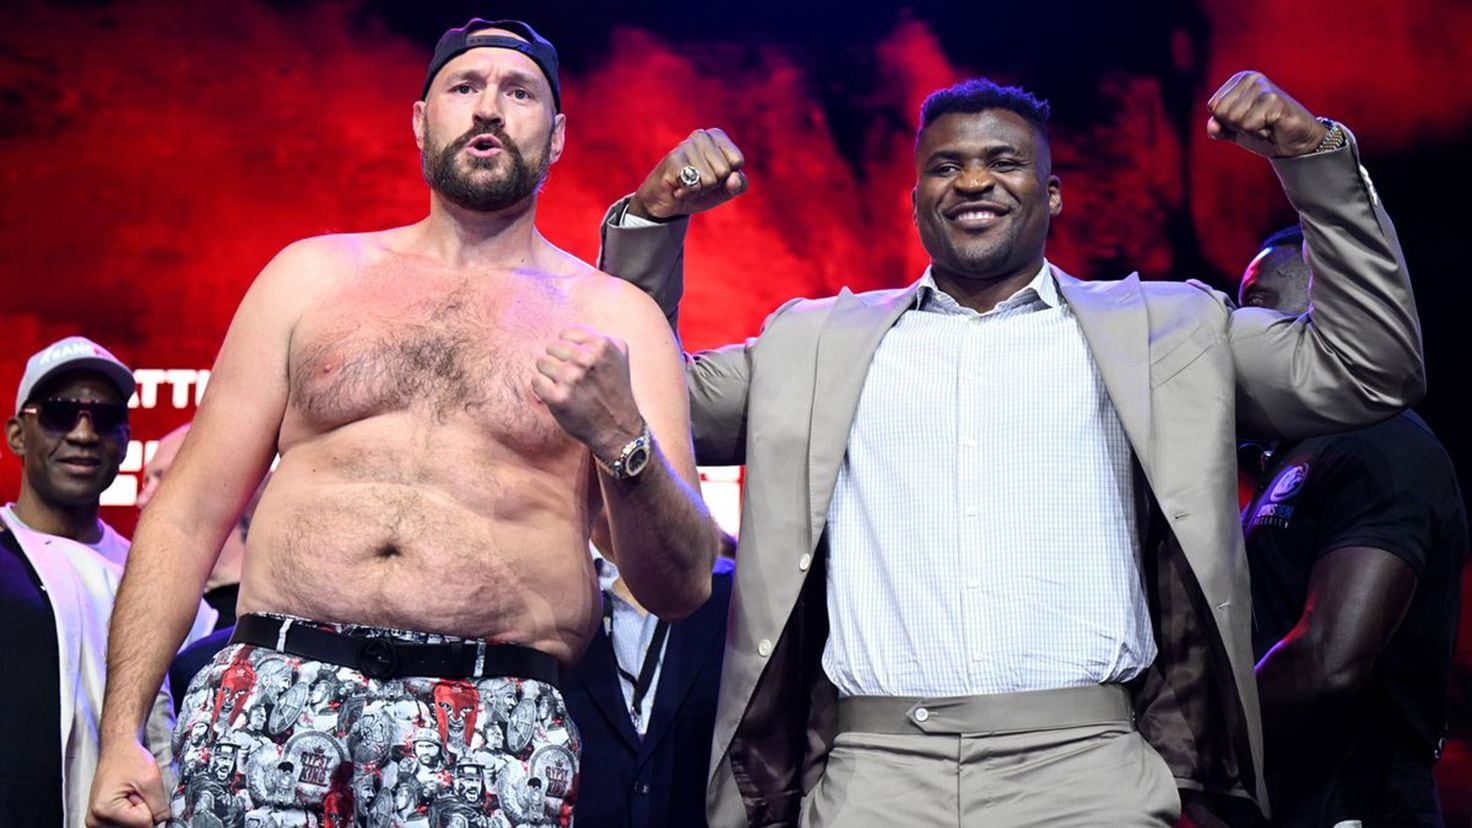 How much do tickets cost for the Tyson Fury vs Francis Ngannou fight